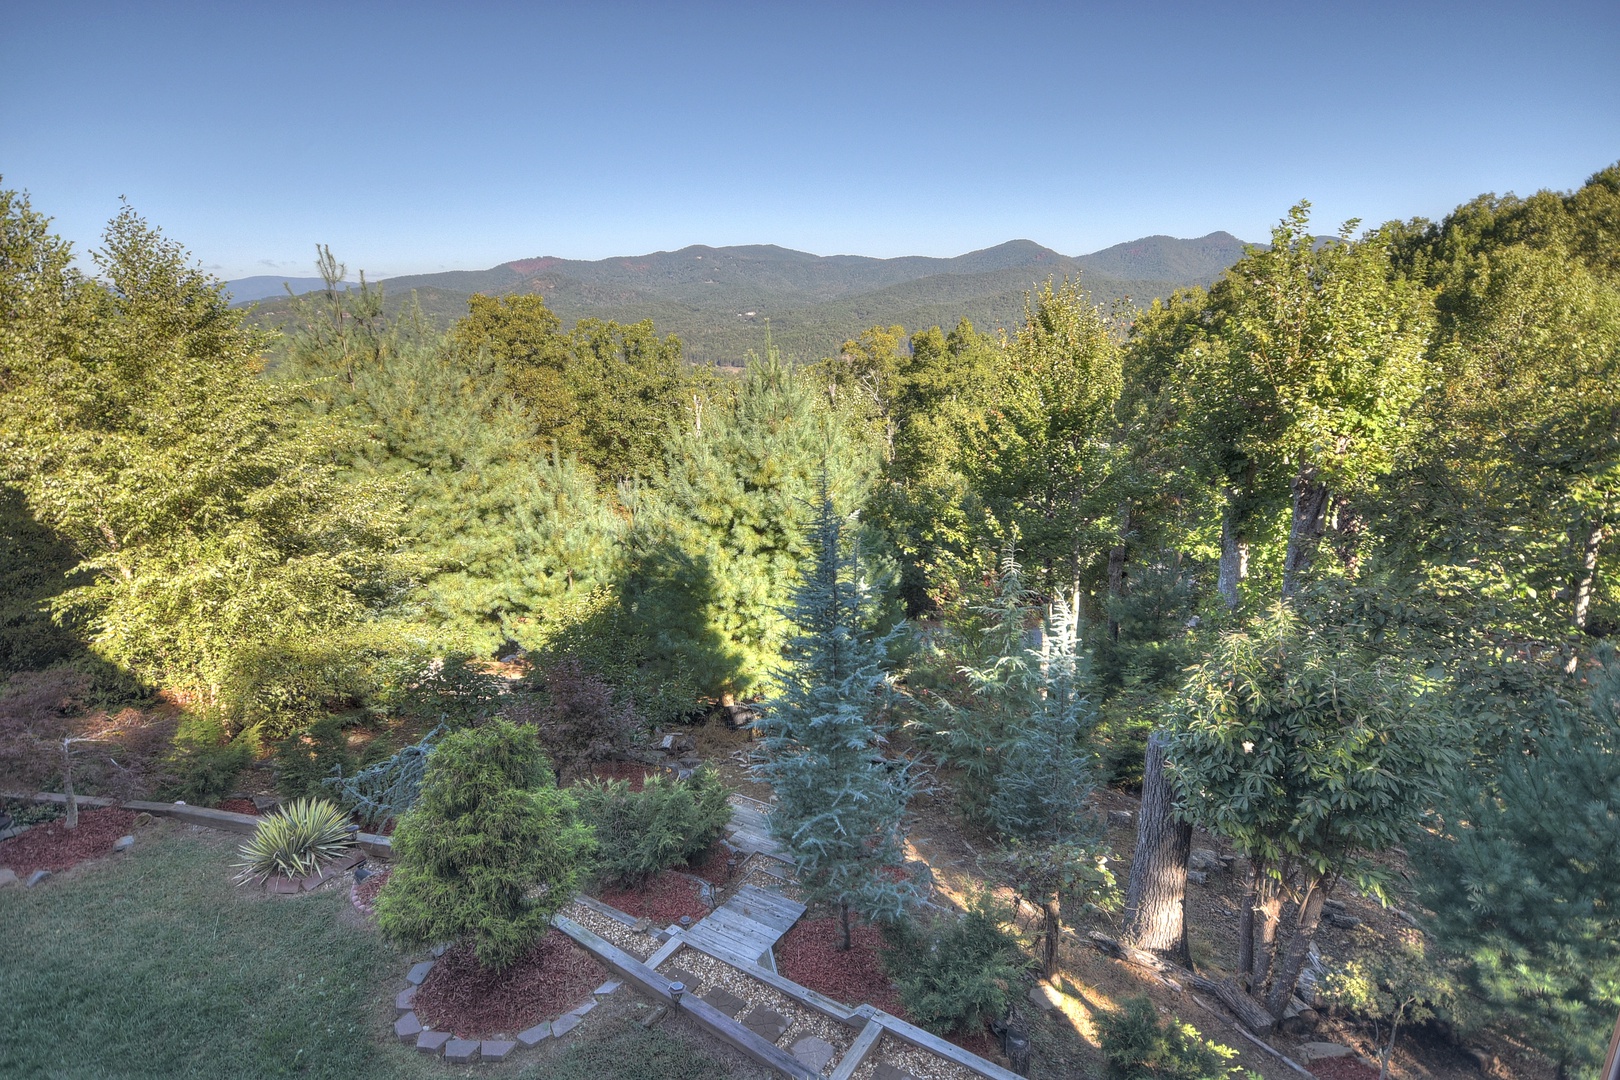 Fraggle Rock - Beautifully Landscaped Yard with Mountain Views